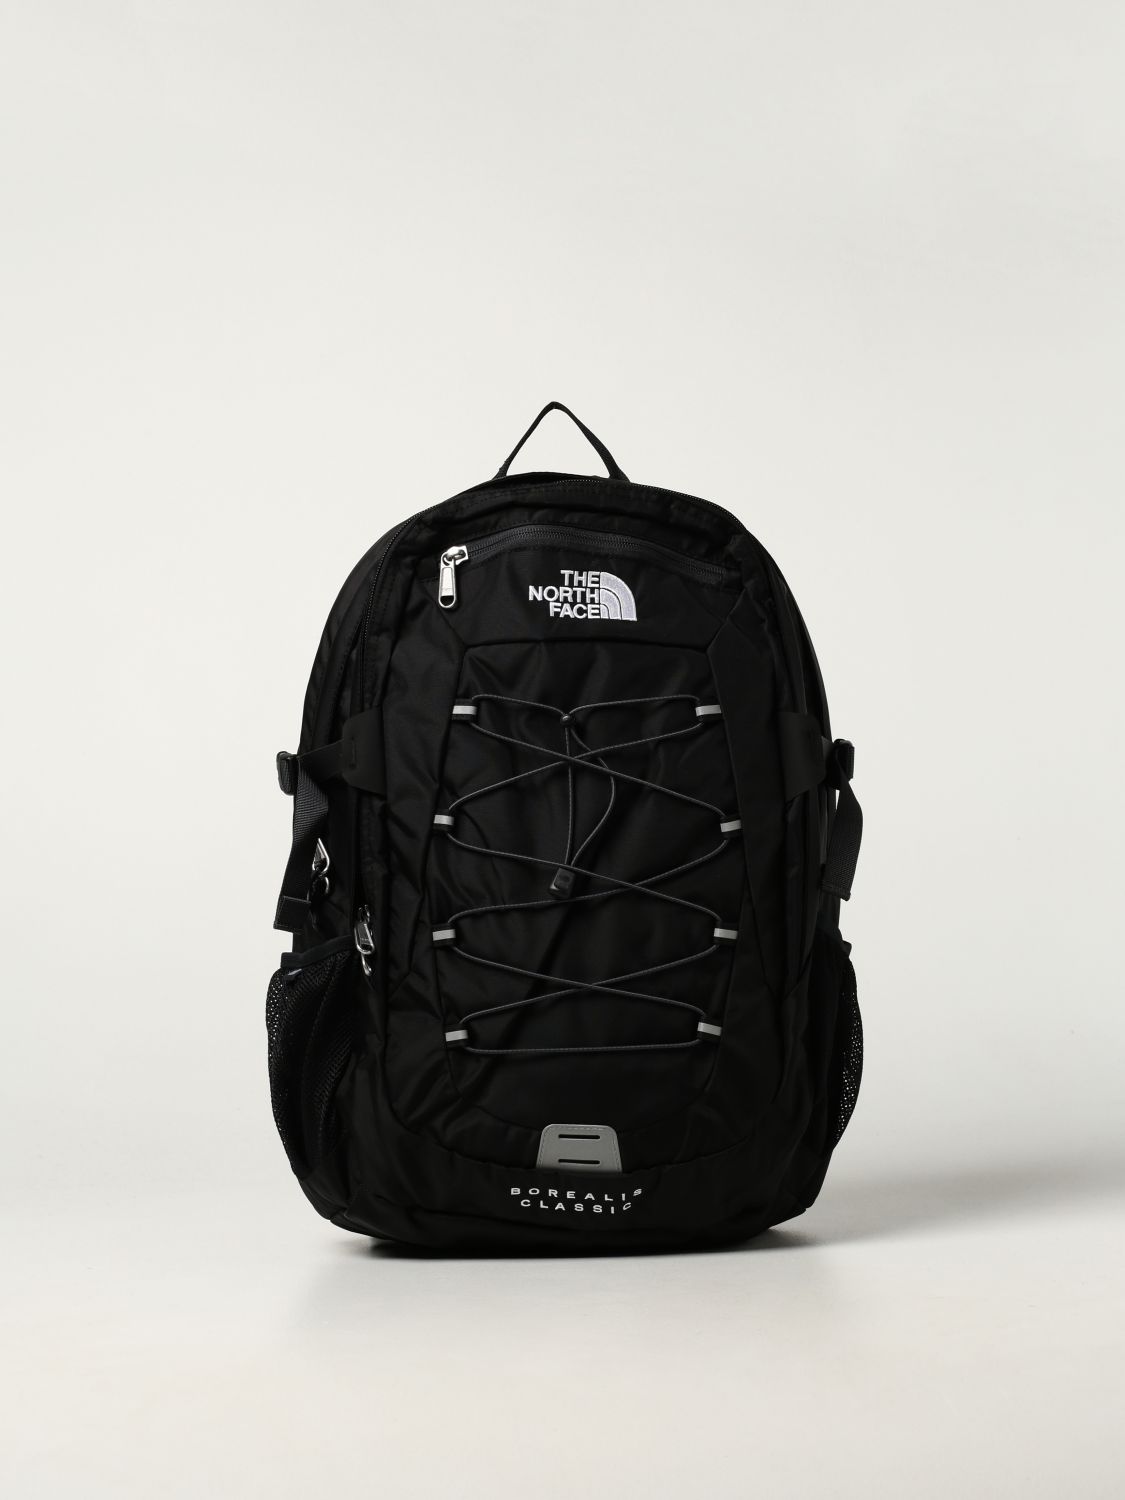 vertalen Achterhouden tobben THE NORTH FACE: Borealist backpack in technical fabric - Black | The North  Face backpack NF00CF9CKT01 online on GIGLIO.COM